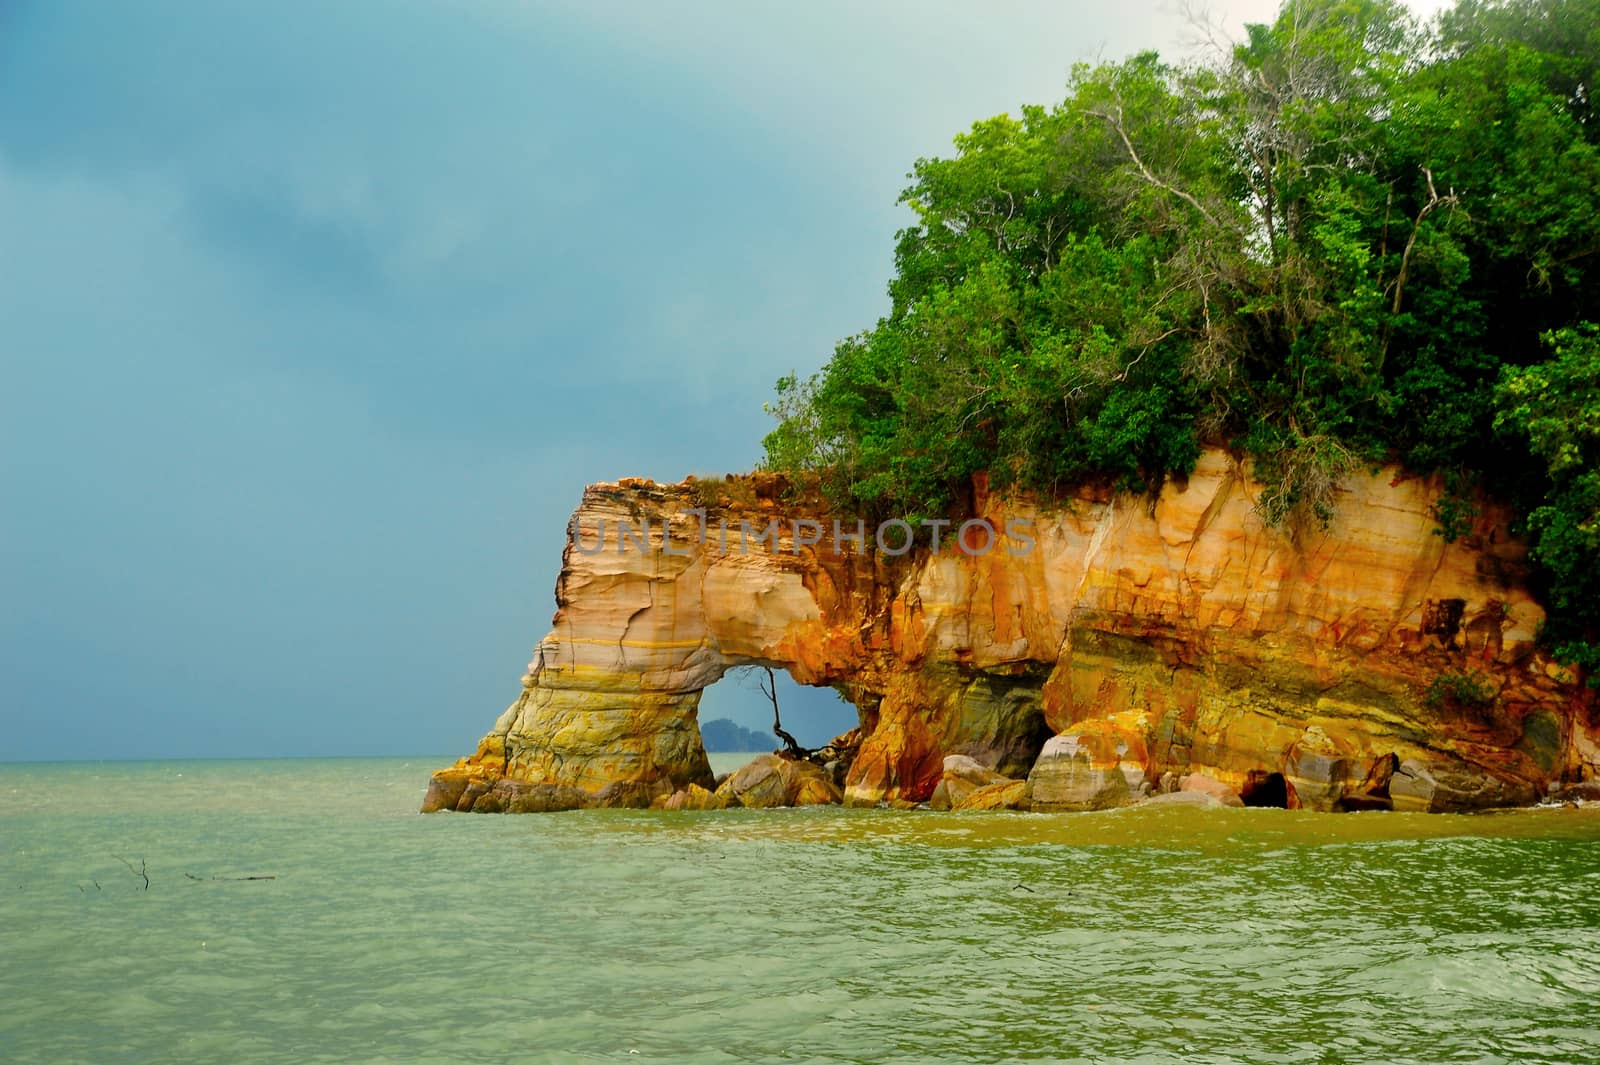 Buffalo Nose Cape at Ao Thalane, Krabi Province, Thailand by ideation90